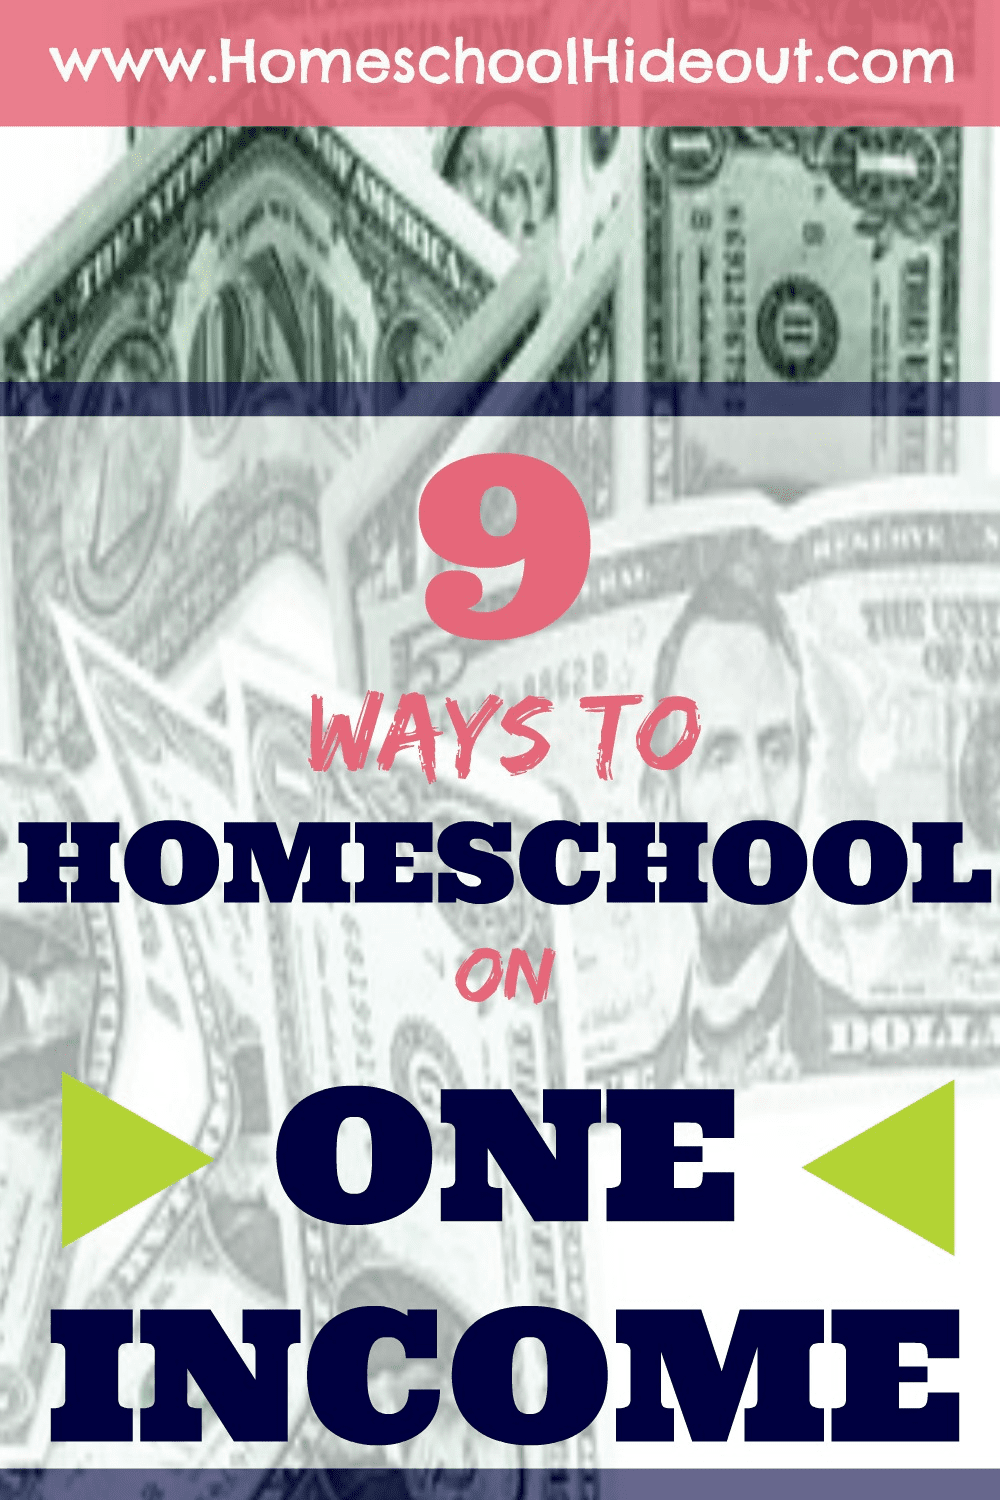 You CAN homeschool on one income! This reassured me and showed me exactly what I need to be doing to remove some stress from our life!